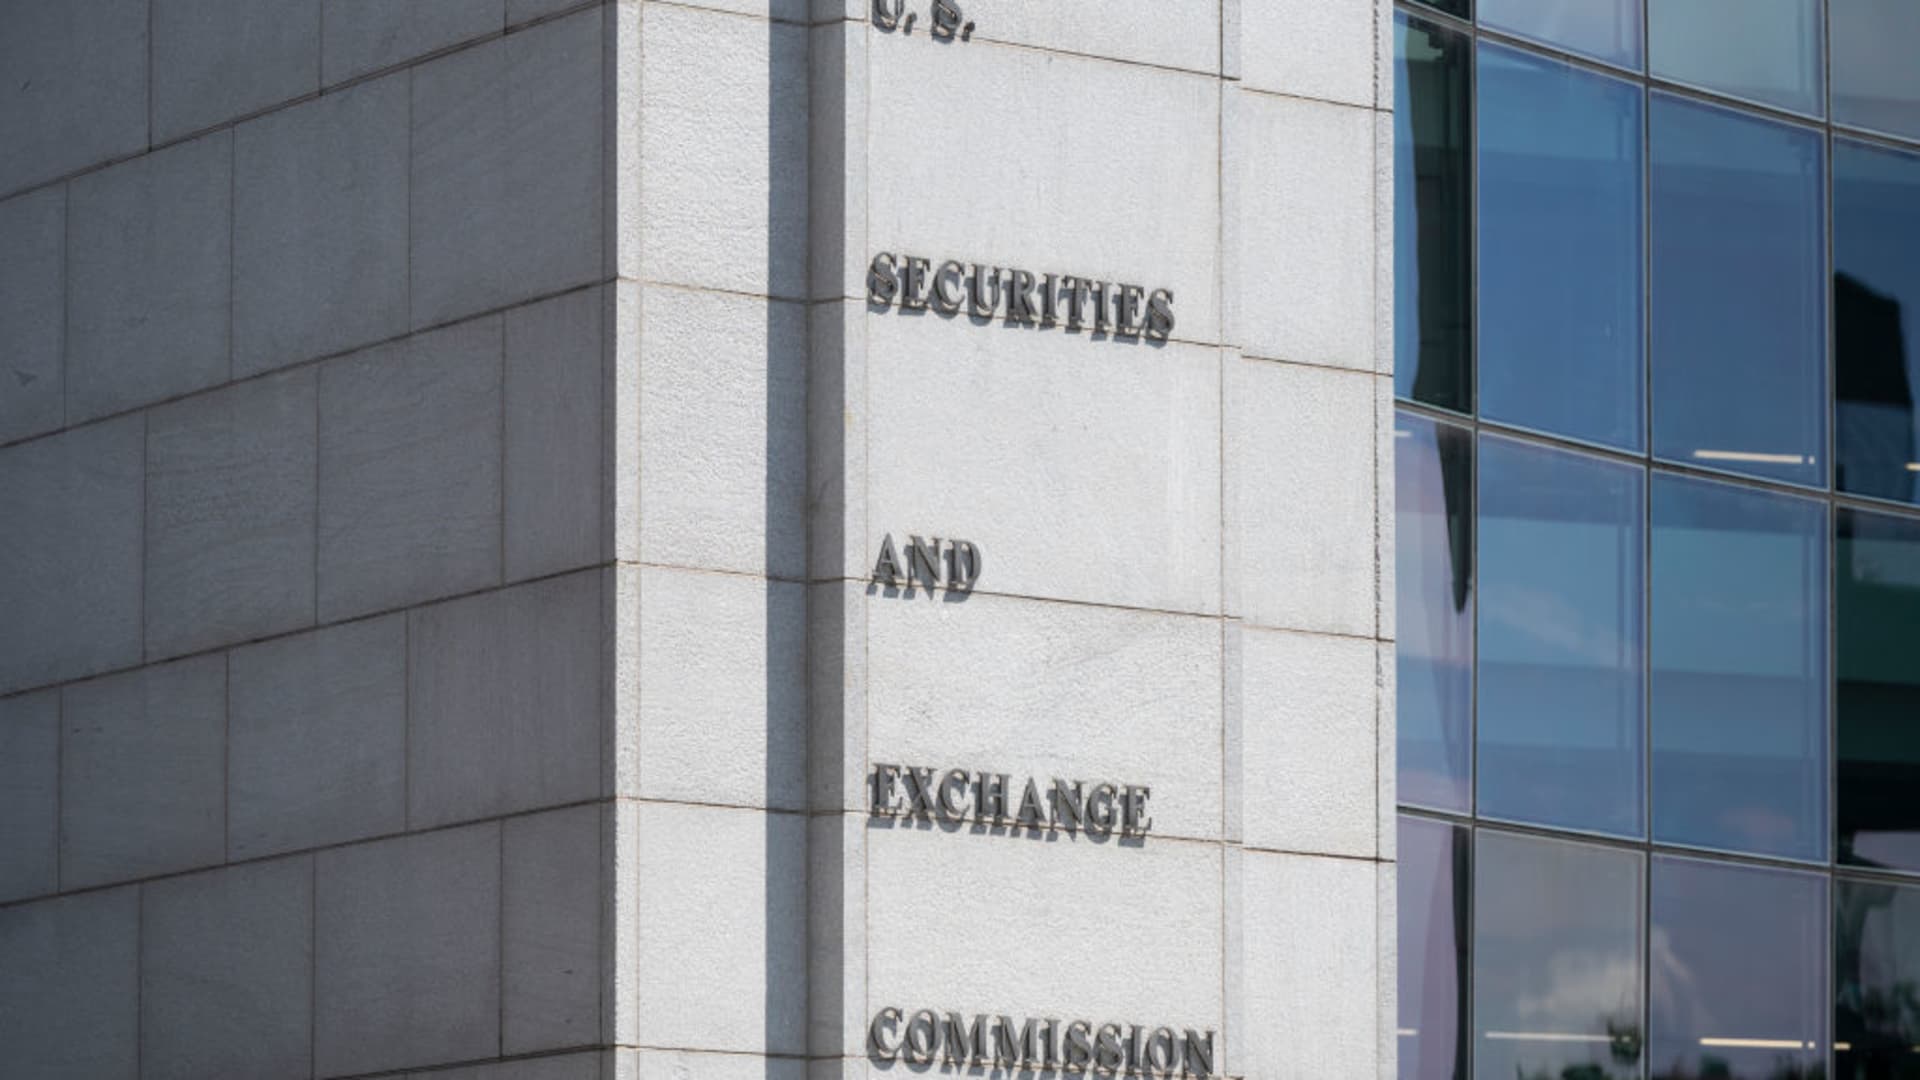 U.S. Securities and Exchange Commission building in Washington, D.C.